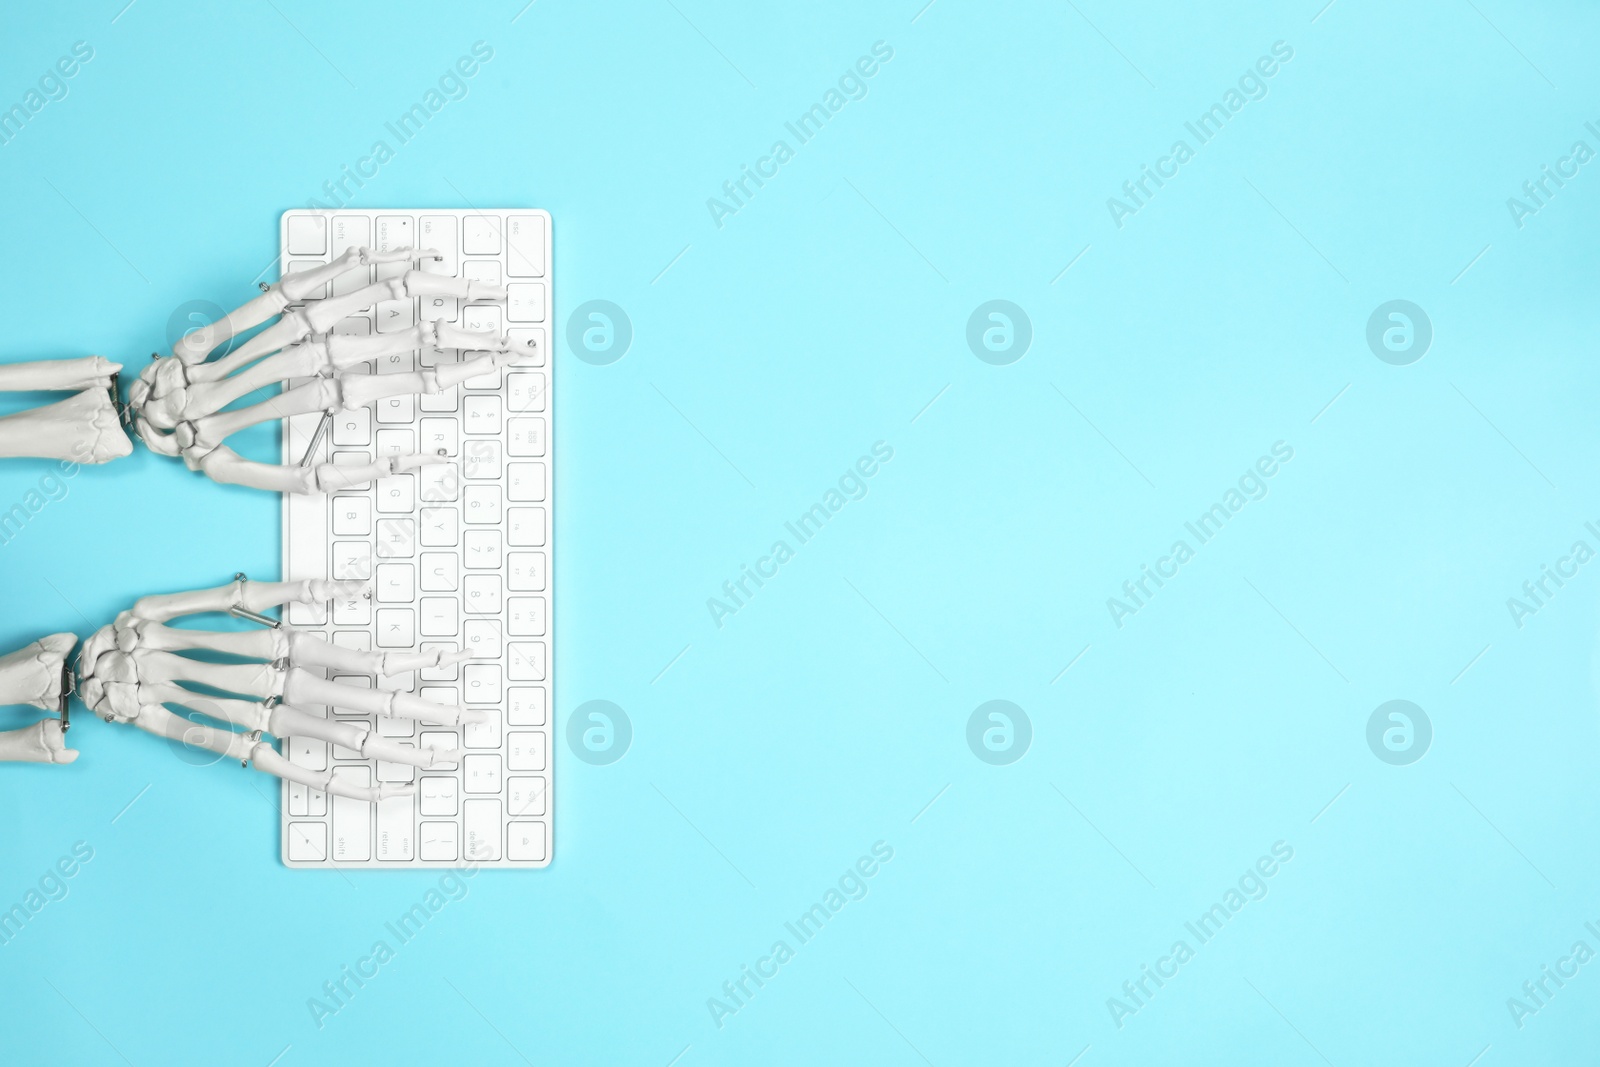 Photo of Human skeleton using computer keyboard on light blue background, top view. Space for text